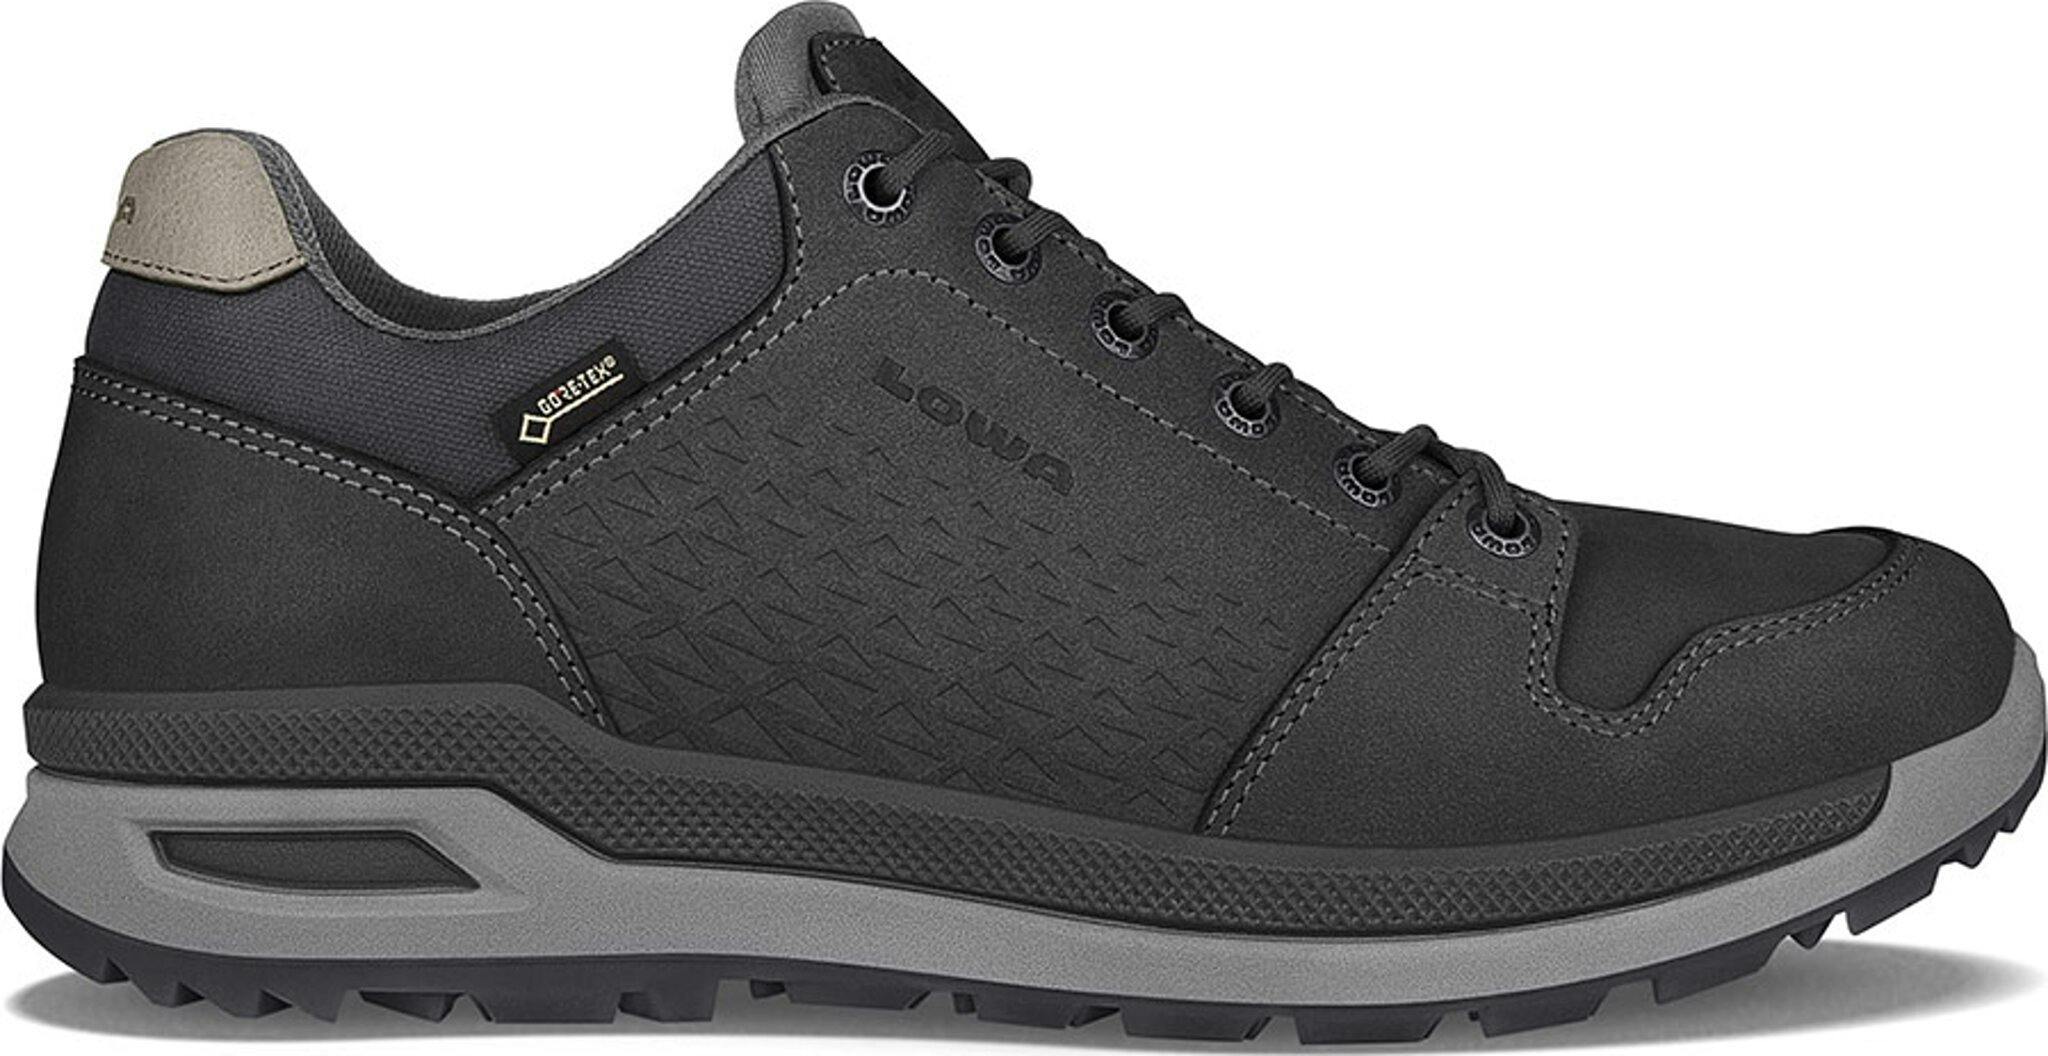 Product image for Locarno GTX Lo Hiking Shoes - Men's